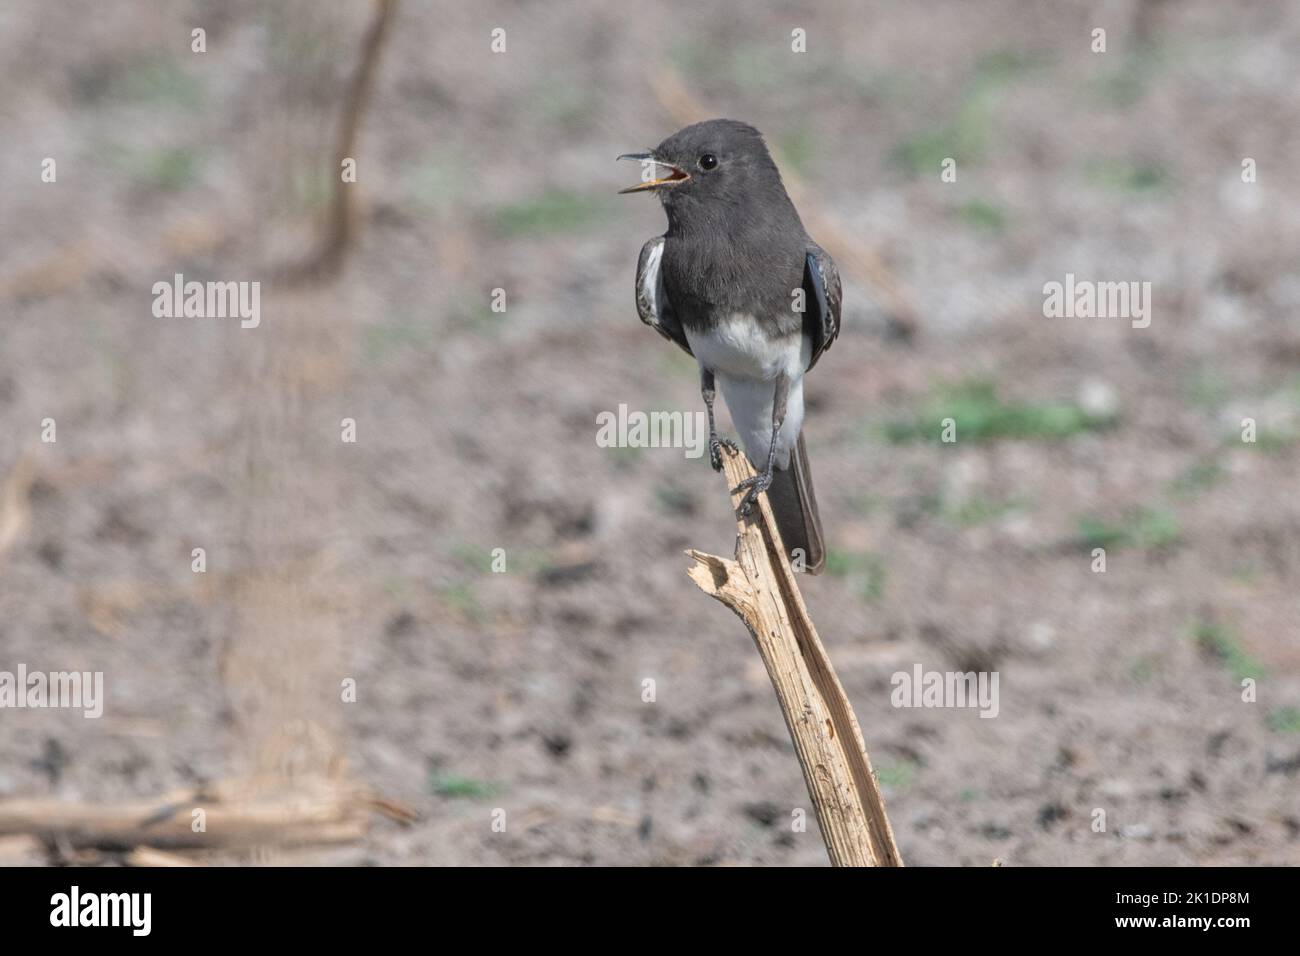 A black phoebe (Sayornis nigricans) a flycatcher panting and thermoregulating during a heatwave in California. Stock Photo